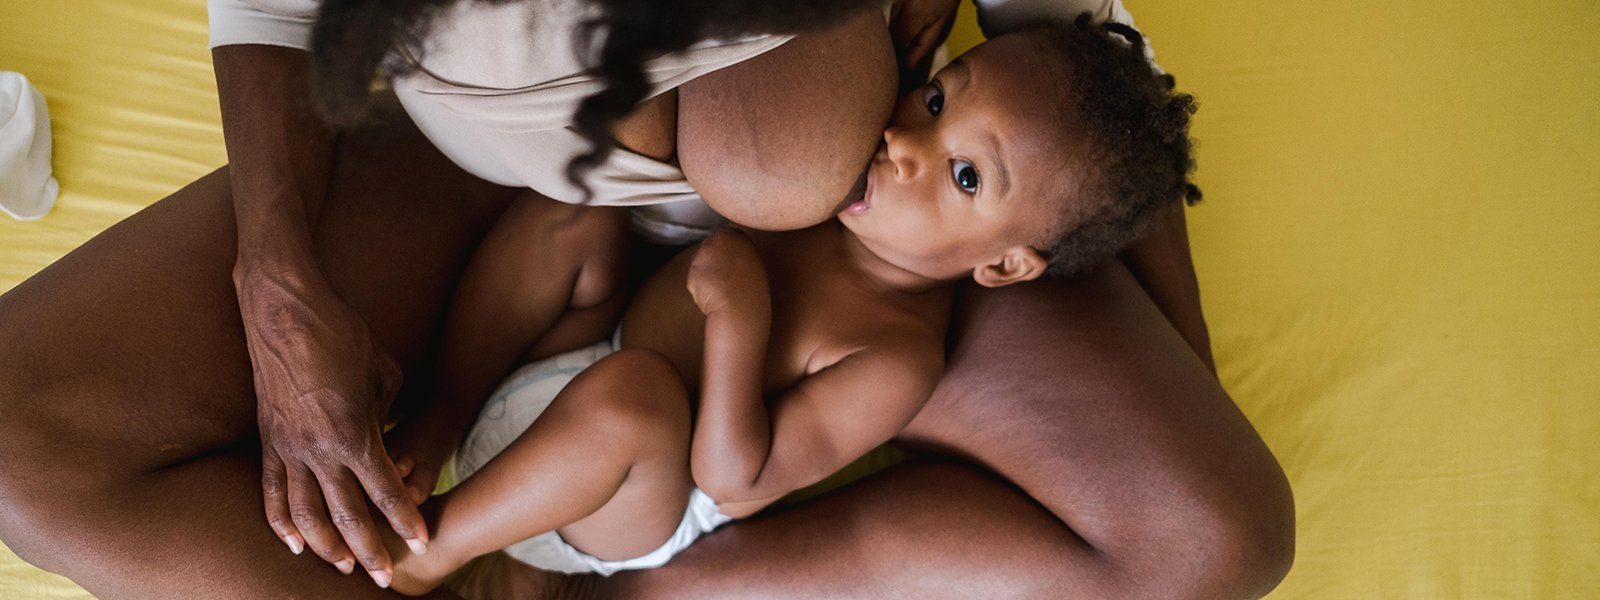 Breastfeeding on Demand: a Cross-Cultural Perspective